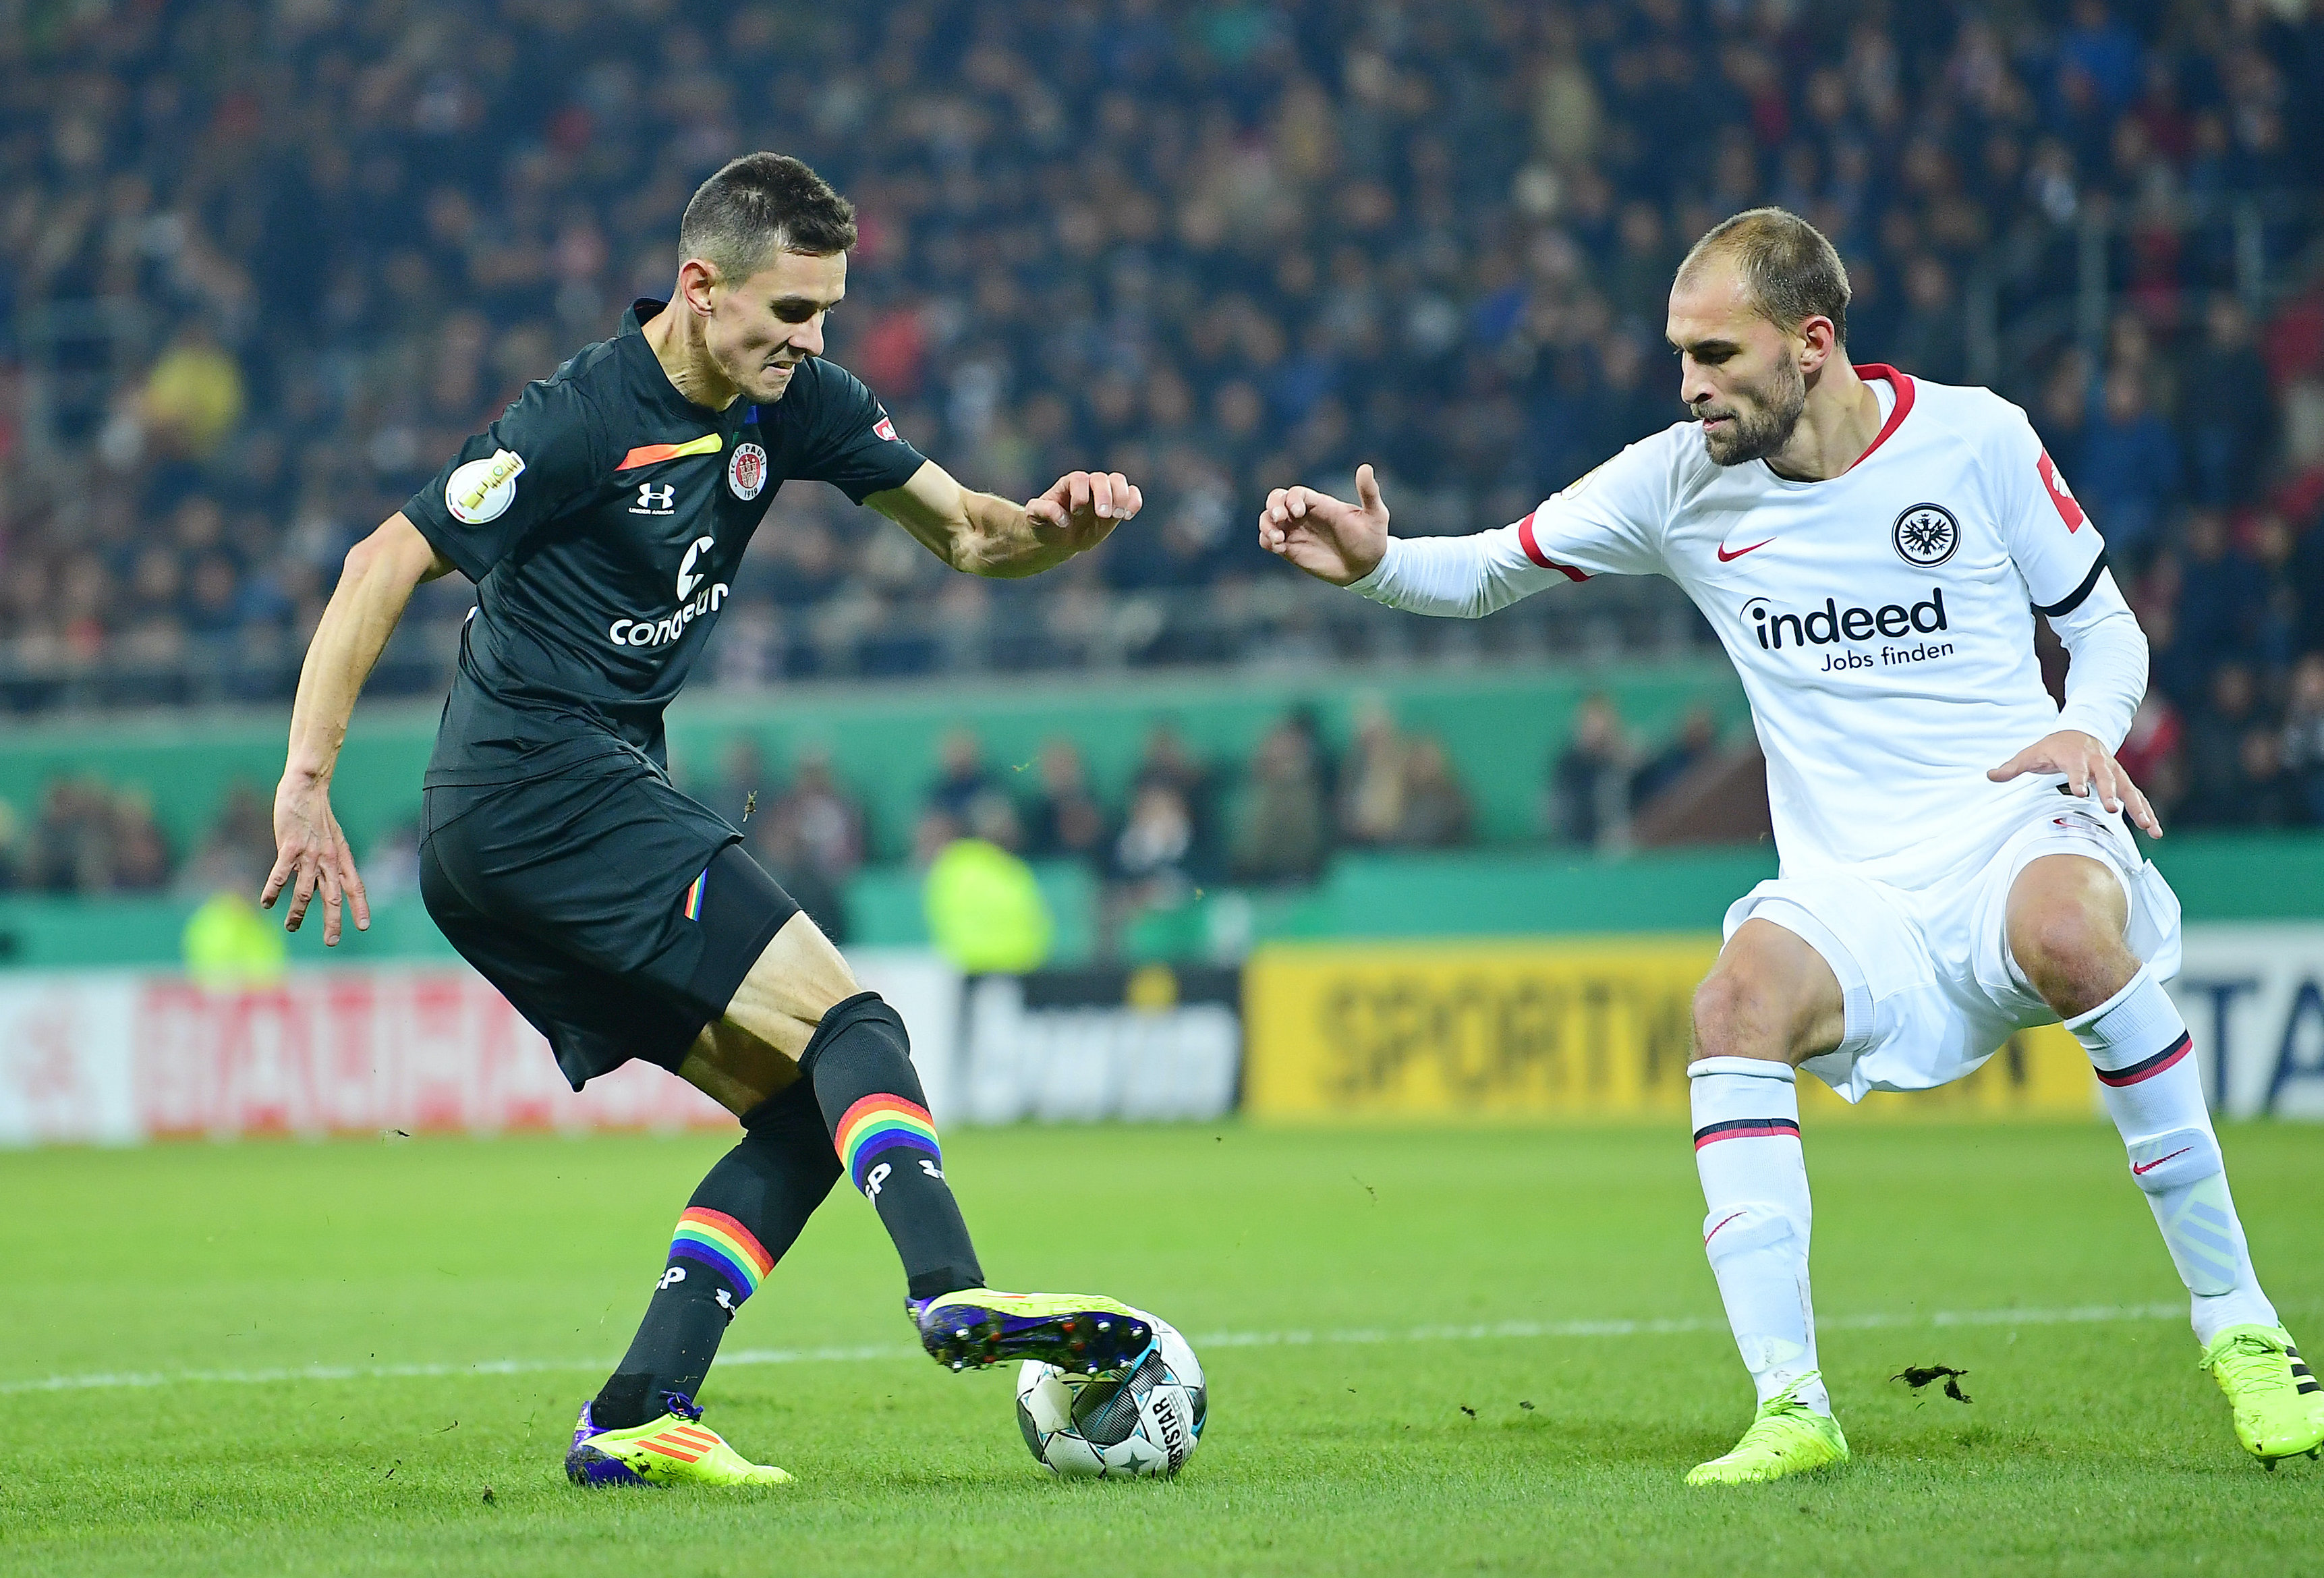 Flum's first start this season came against former club Eintracht Frankfurt in the DFB Cup.